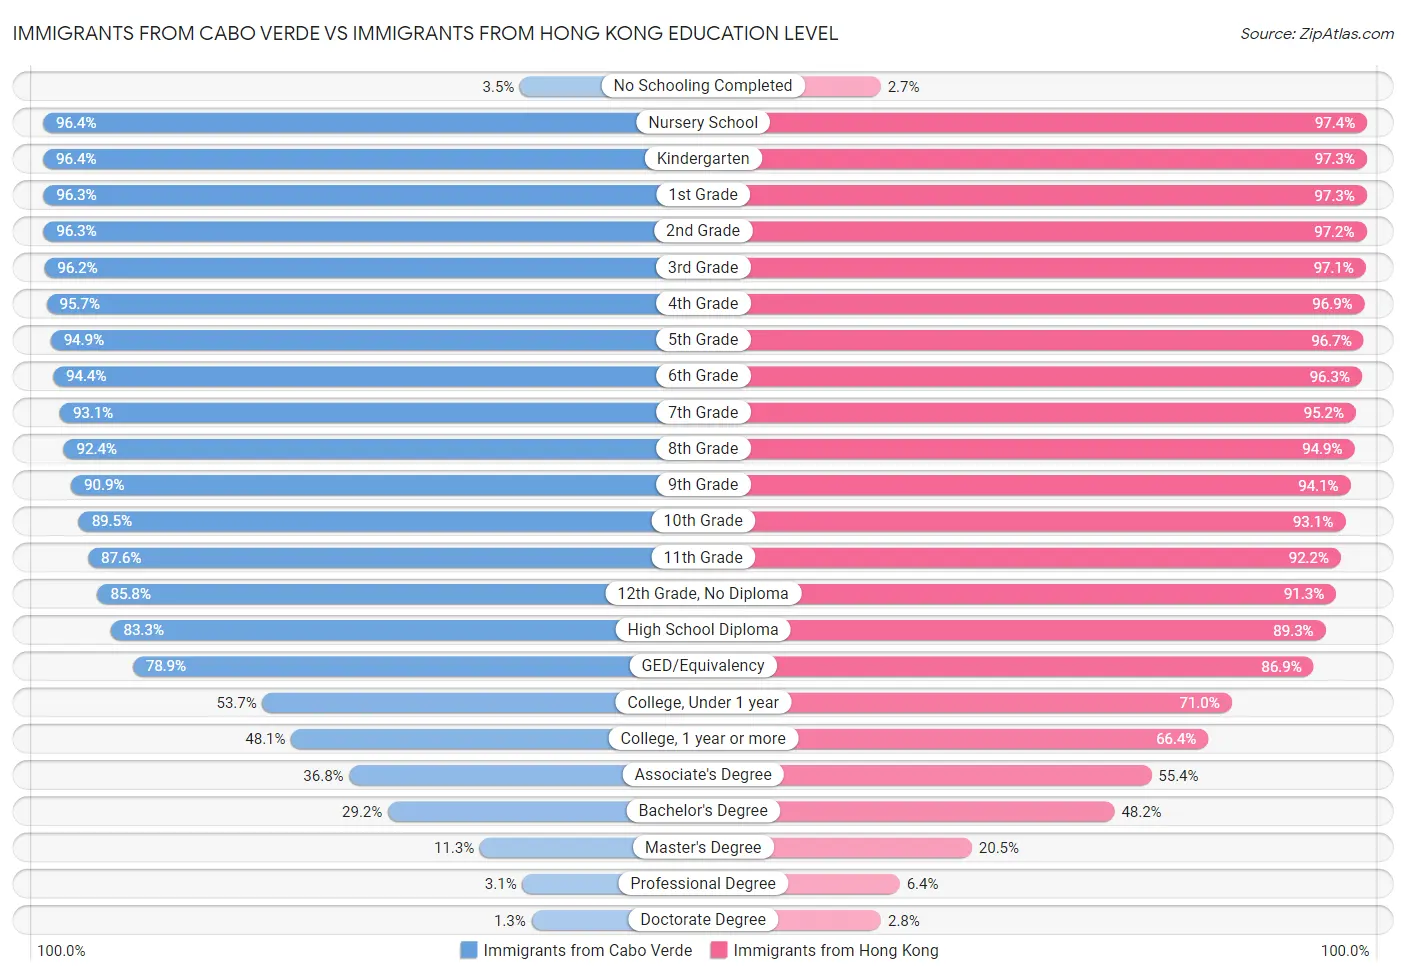 Immigrants from Cabo Verde vs Immigrants from Hong Kong Education Level